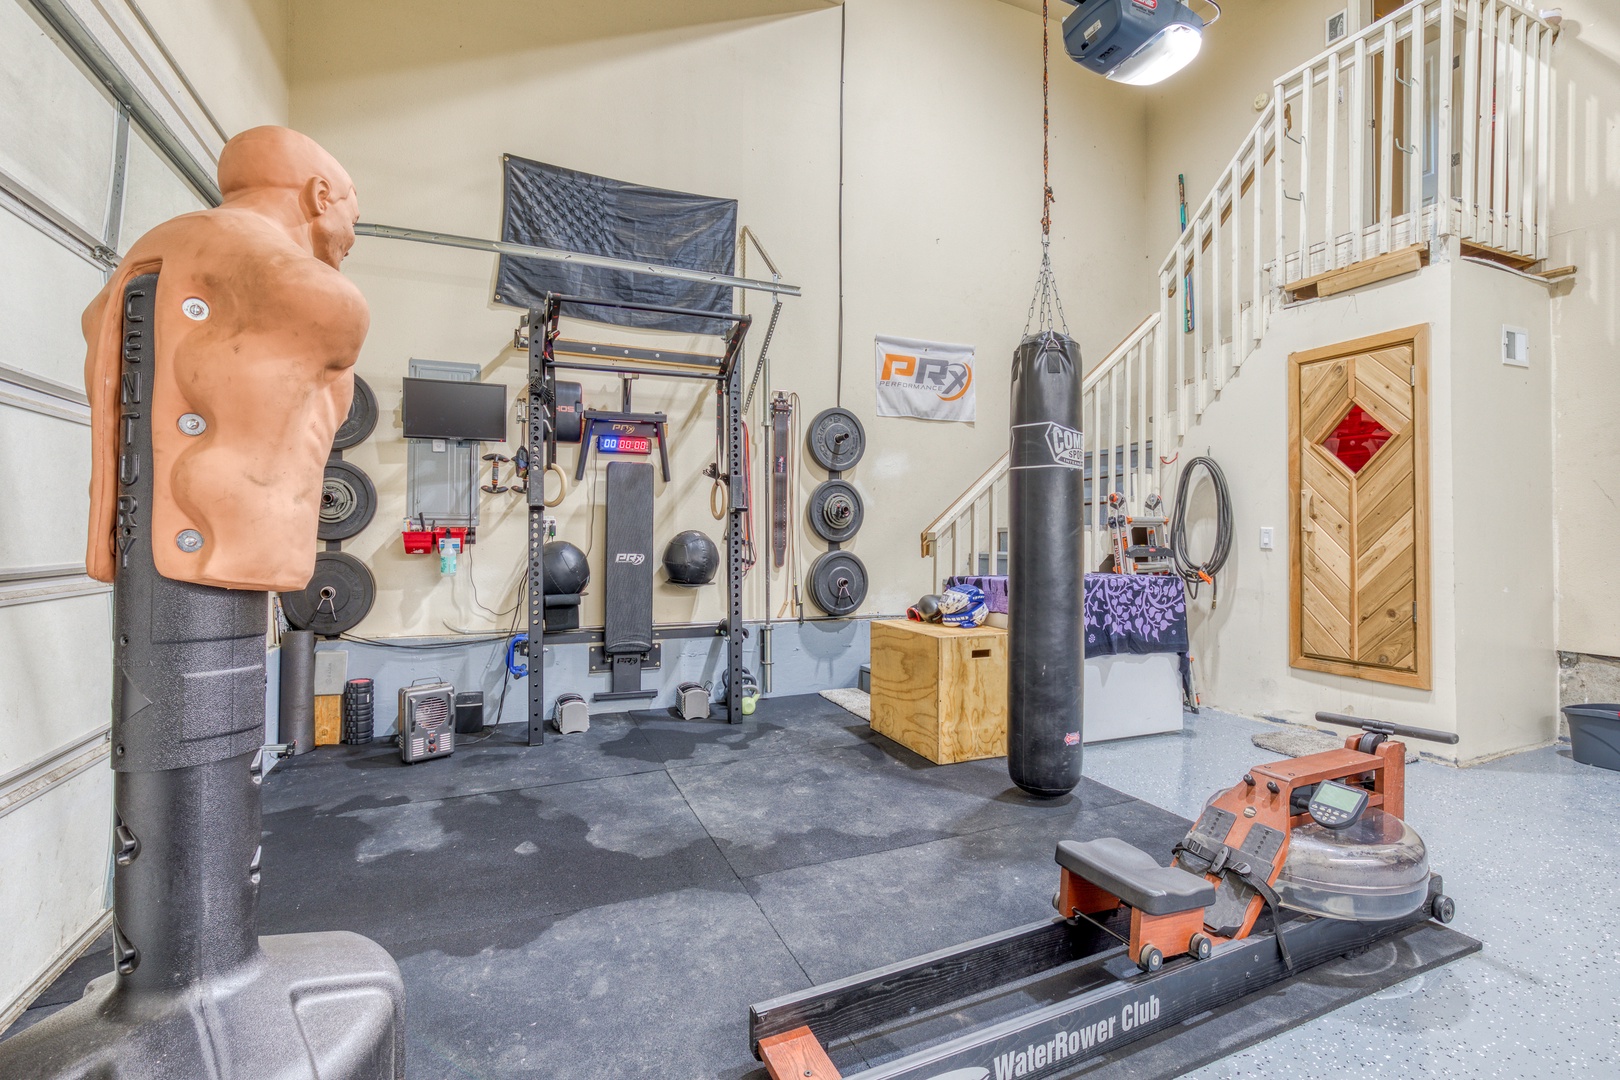 Clackamas Vacation Rentals, Duck Crossing - The garage has a full weight rack, water rowing machine, medicine balls, free weights, and a punching bag for your workout